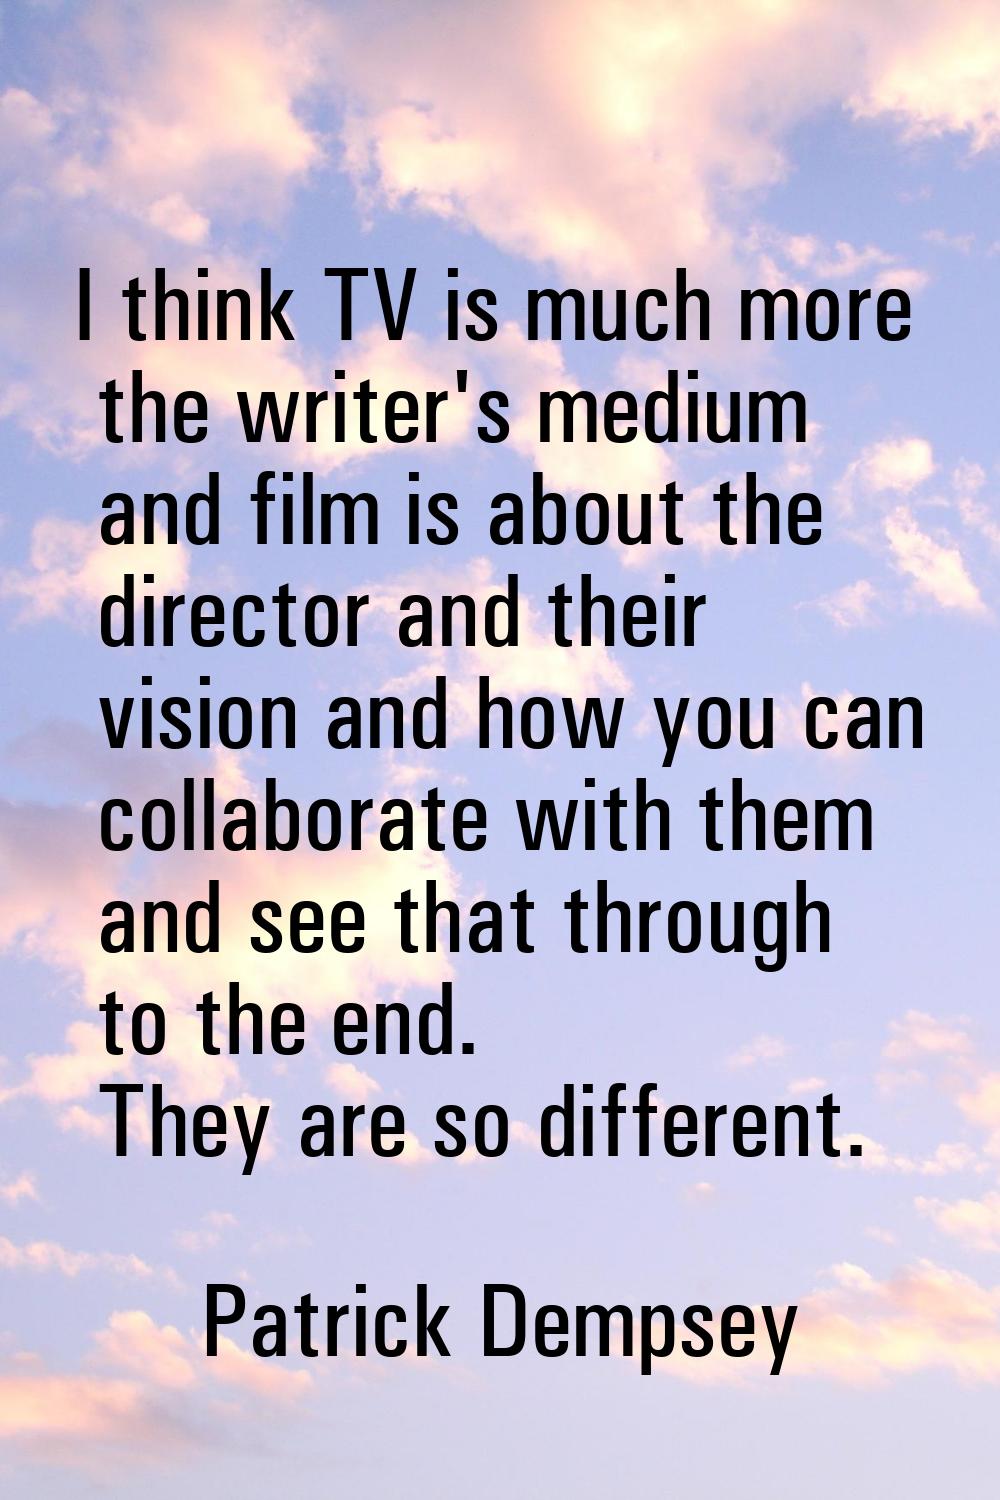 I think TV is much more the writer's medium and film is about the director and their vision and how